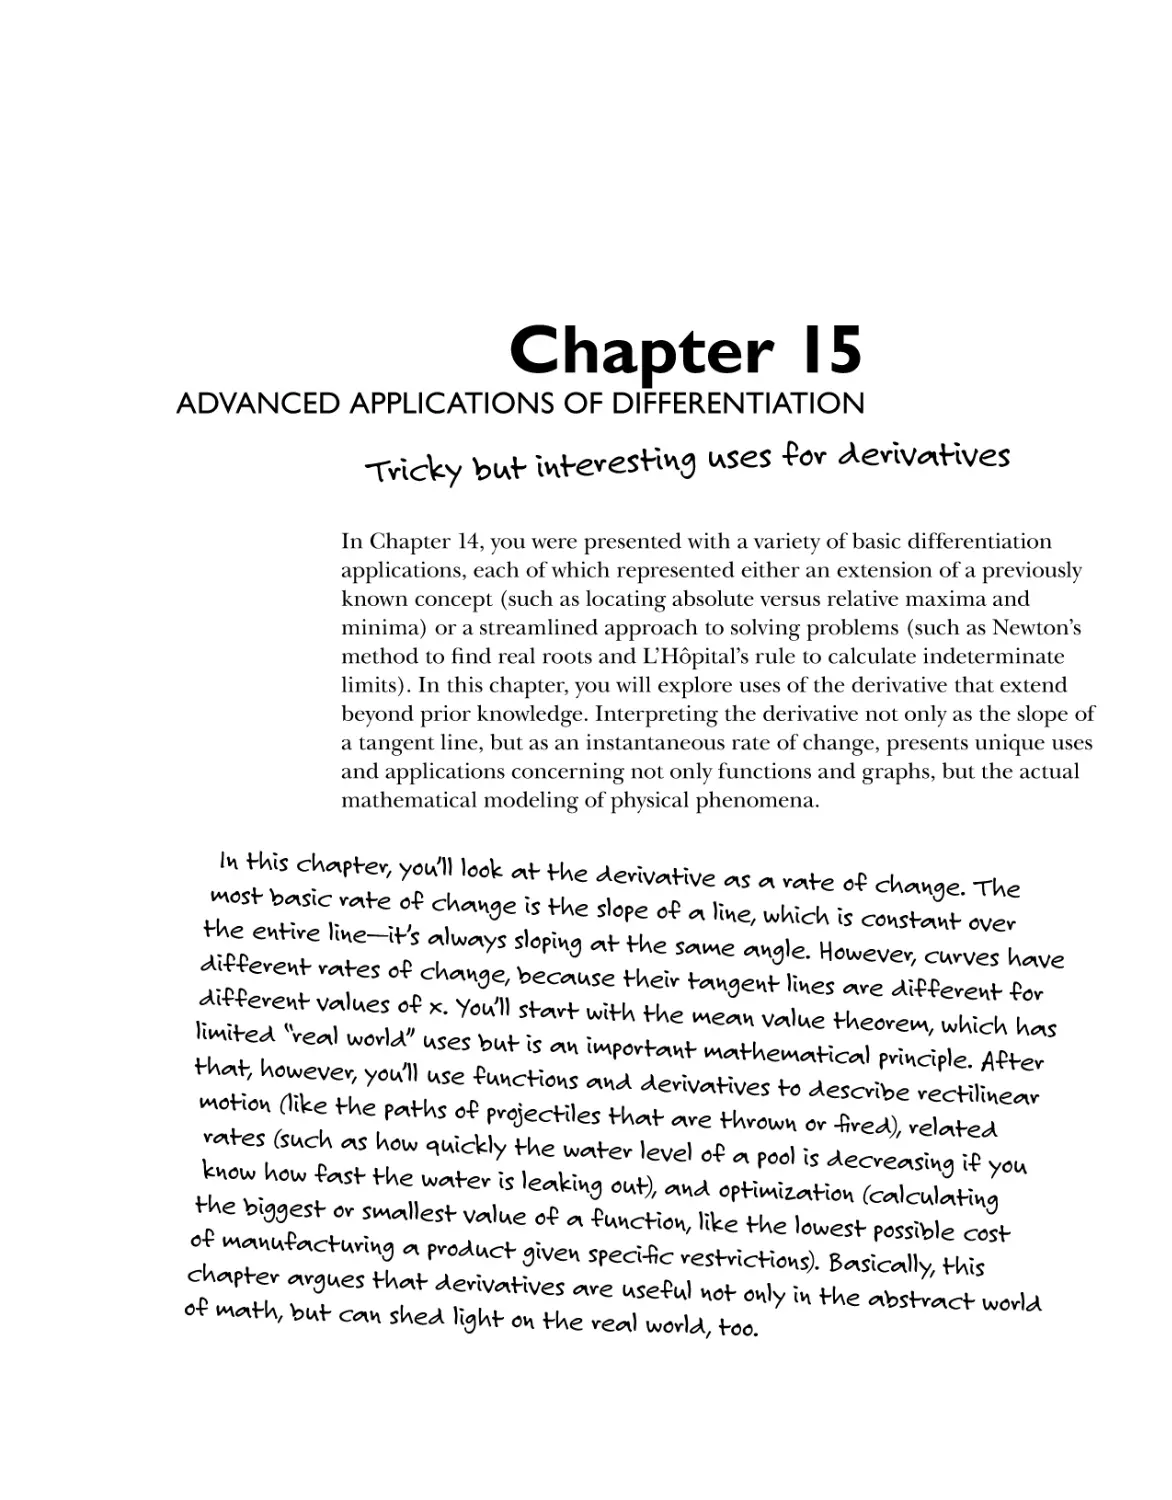 Chapter 15: Advanced Applications of Differentiation 223